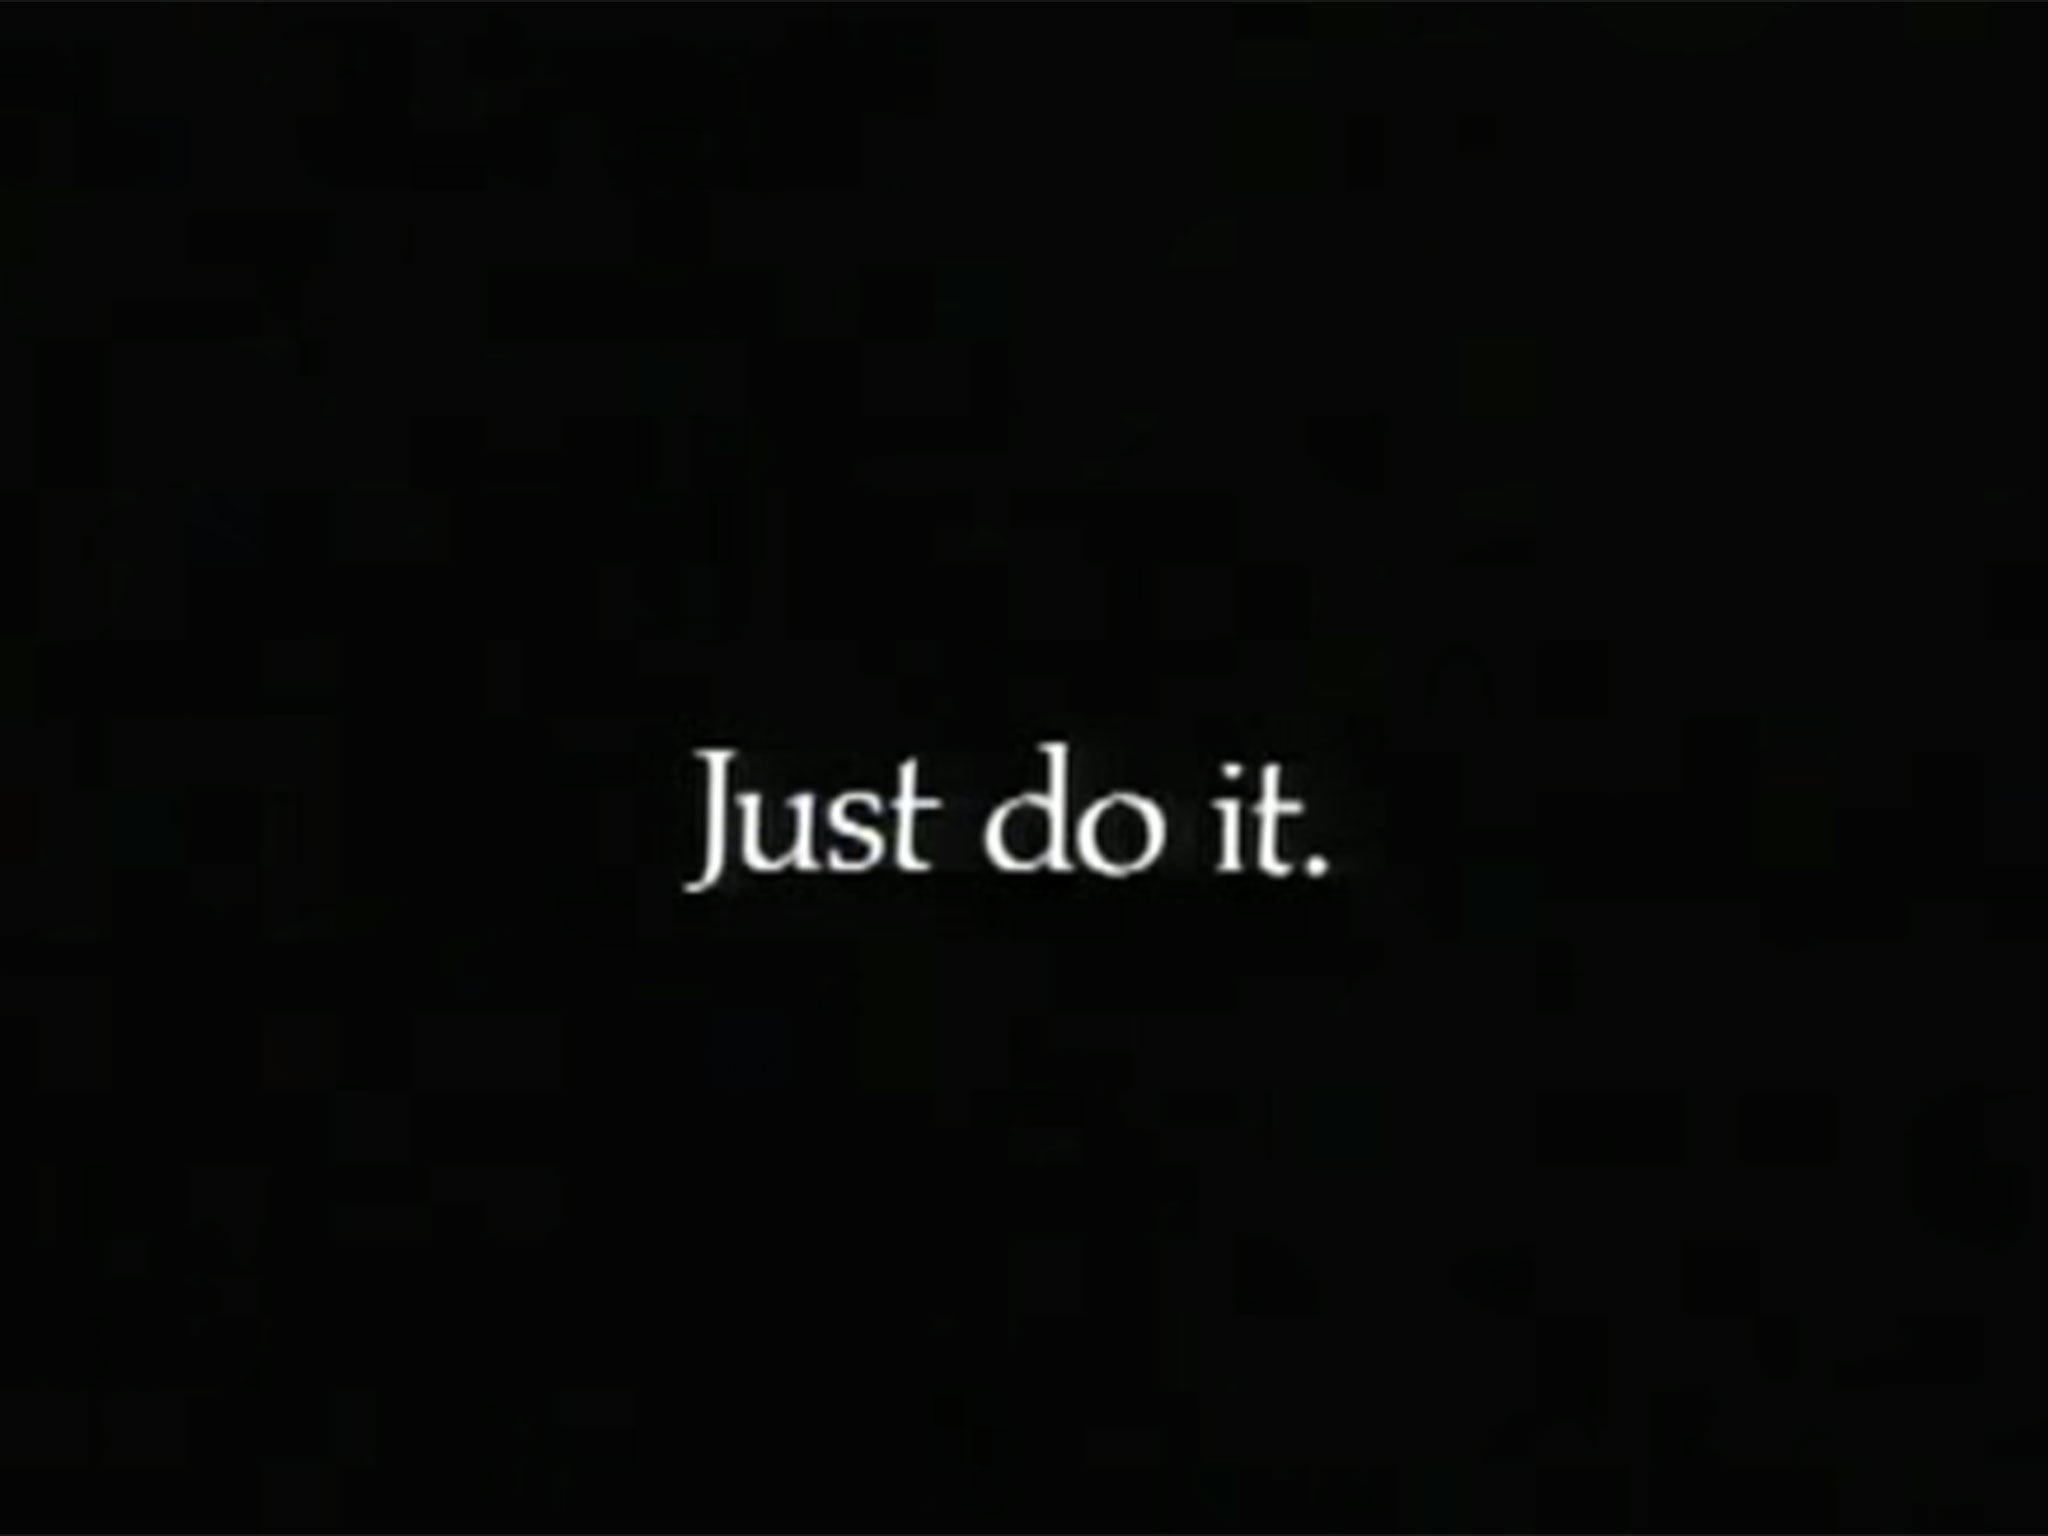 First appearance of Nike's 'Just Do It' logo in 1988